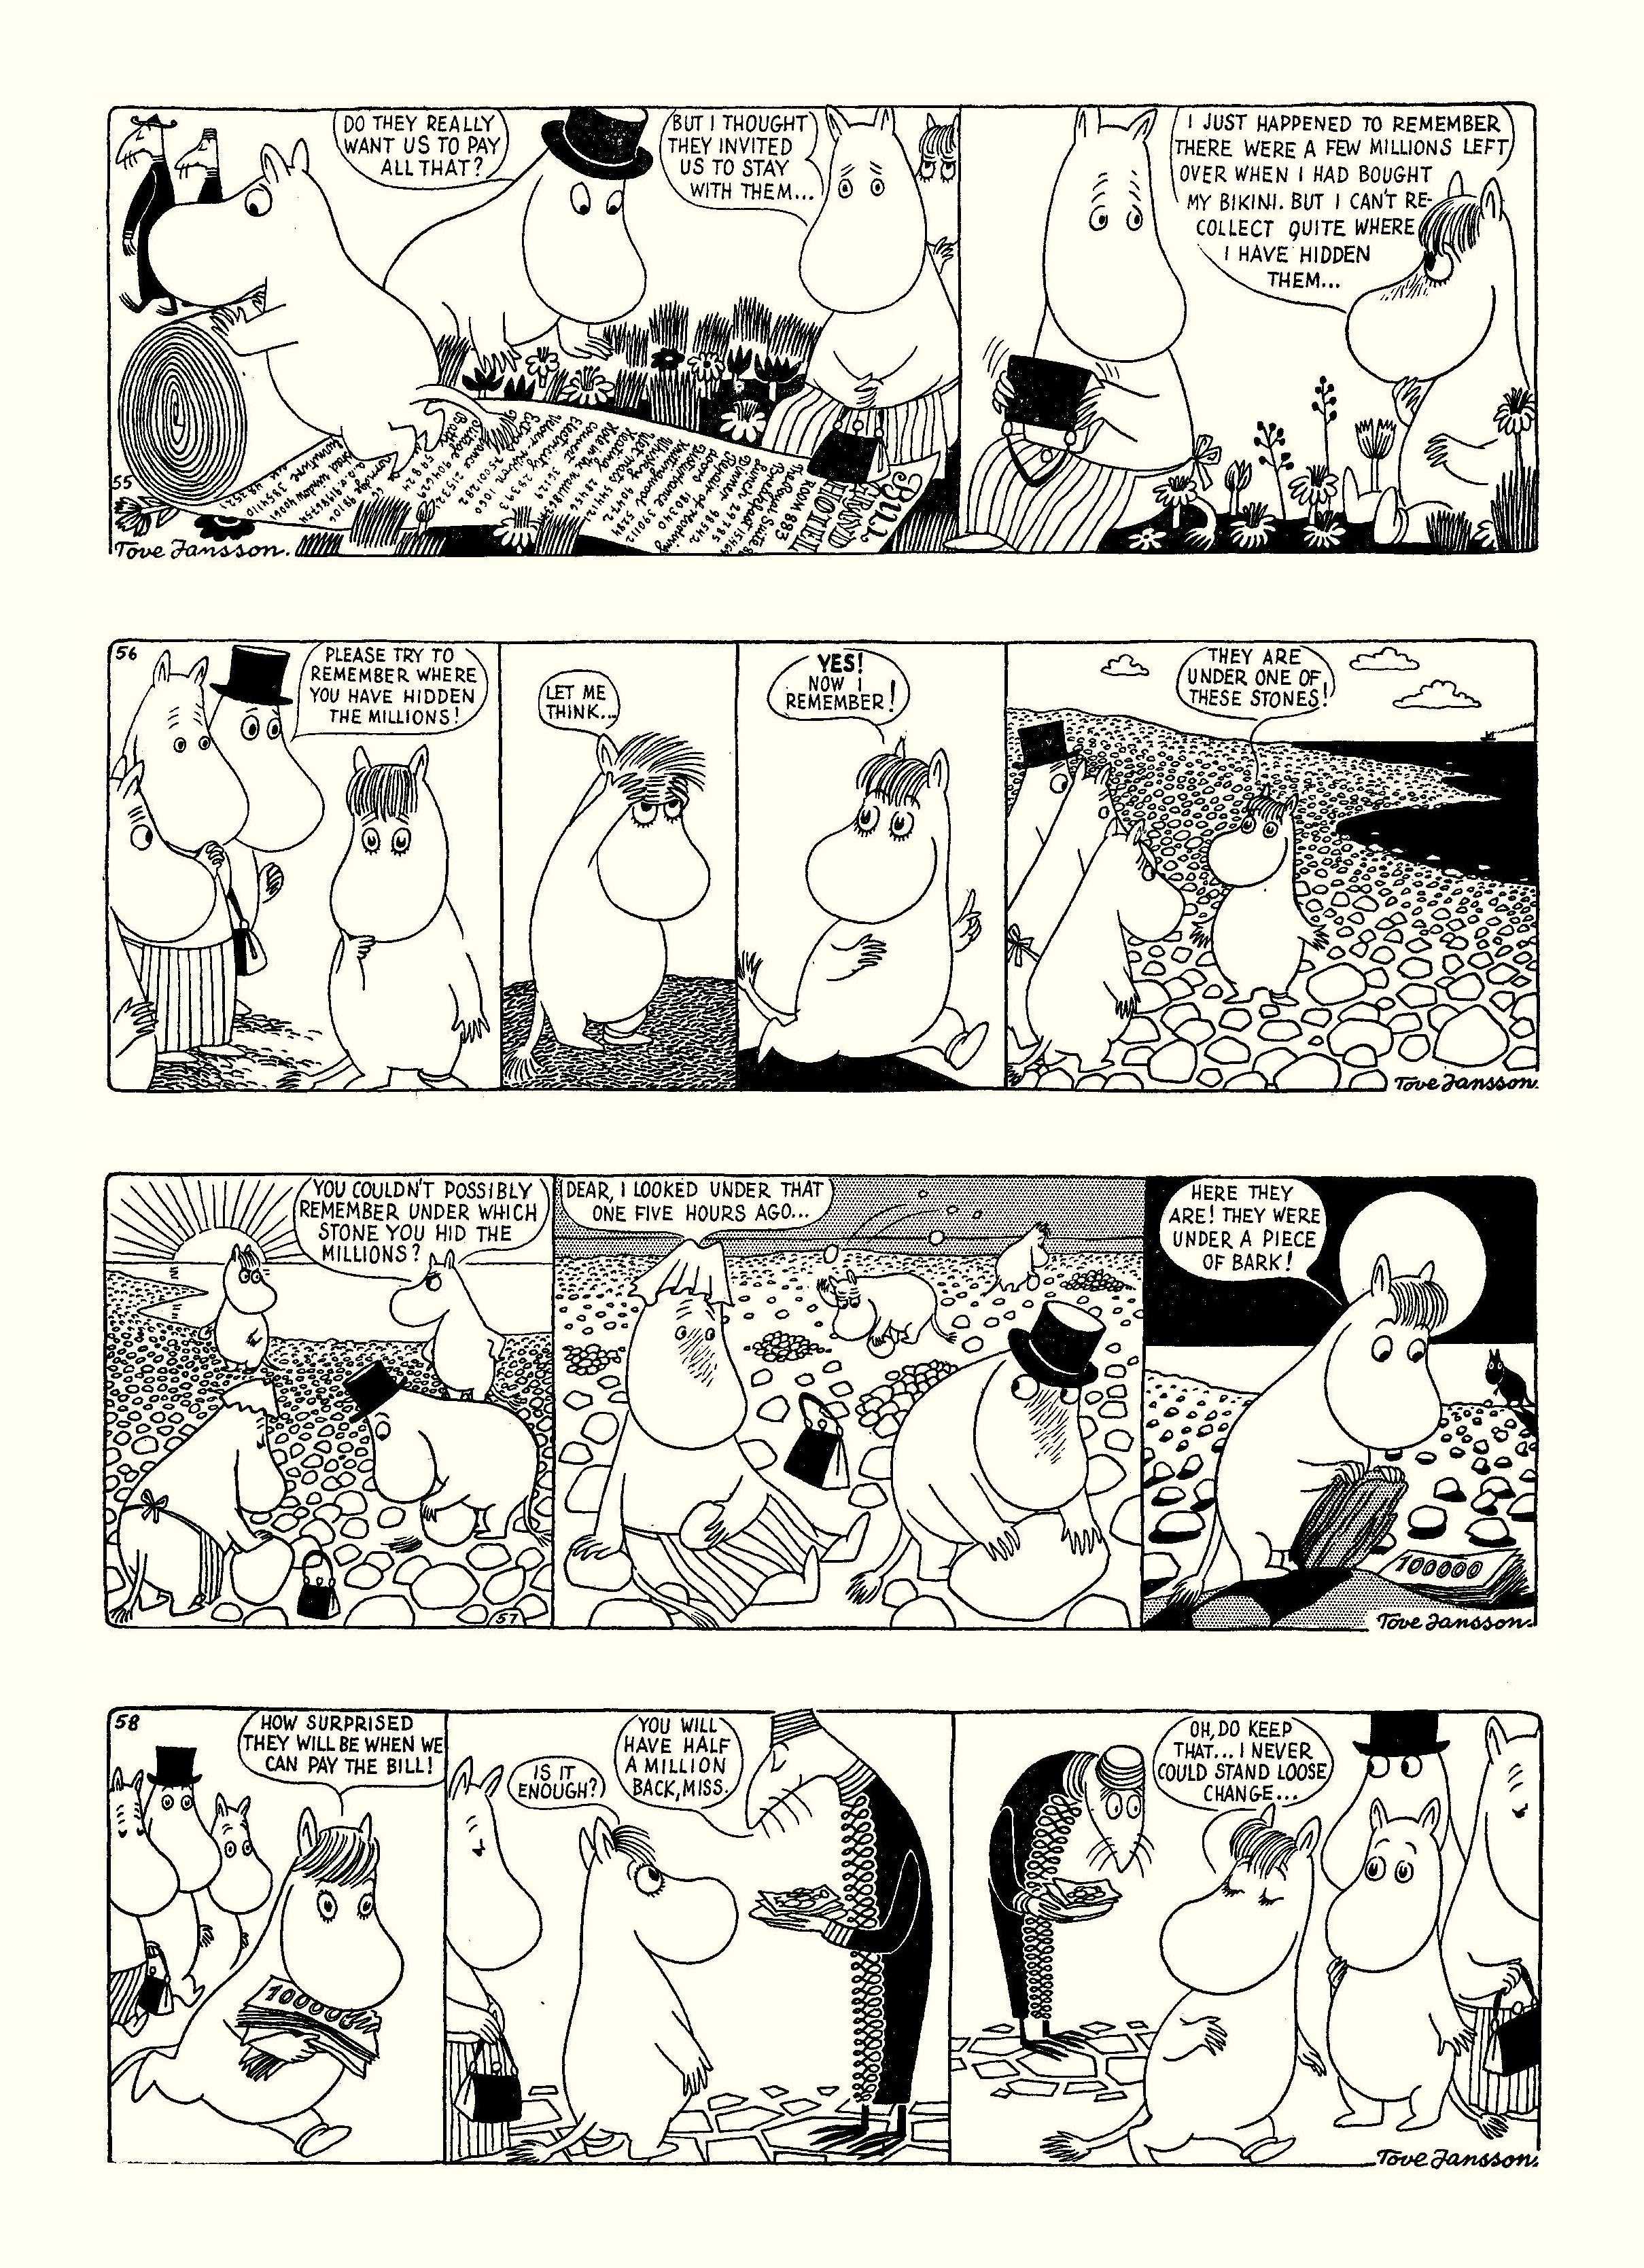 Read online Moomin: The Complete Tove Jansson Comic Strip comic -  Issue # TPB 1 - 62